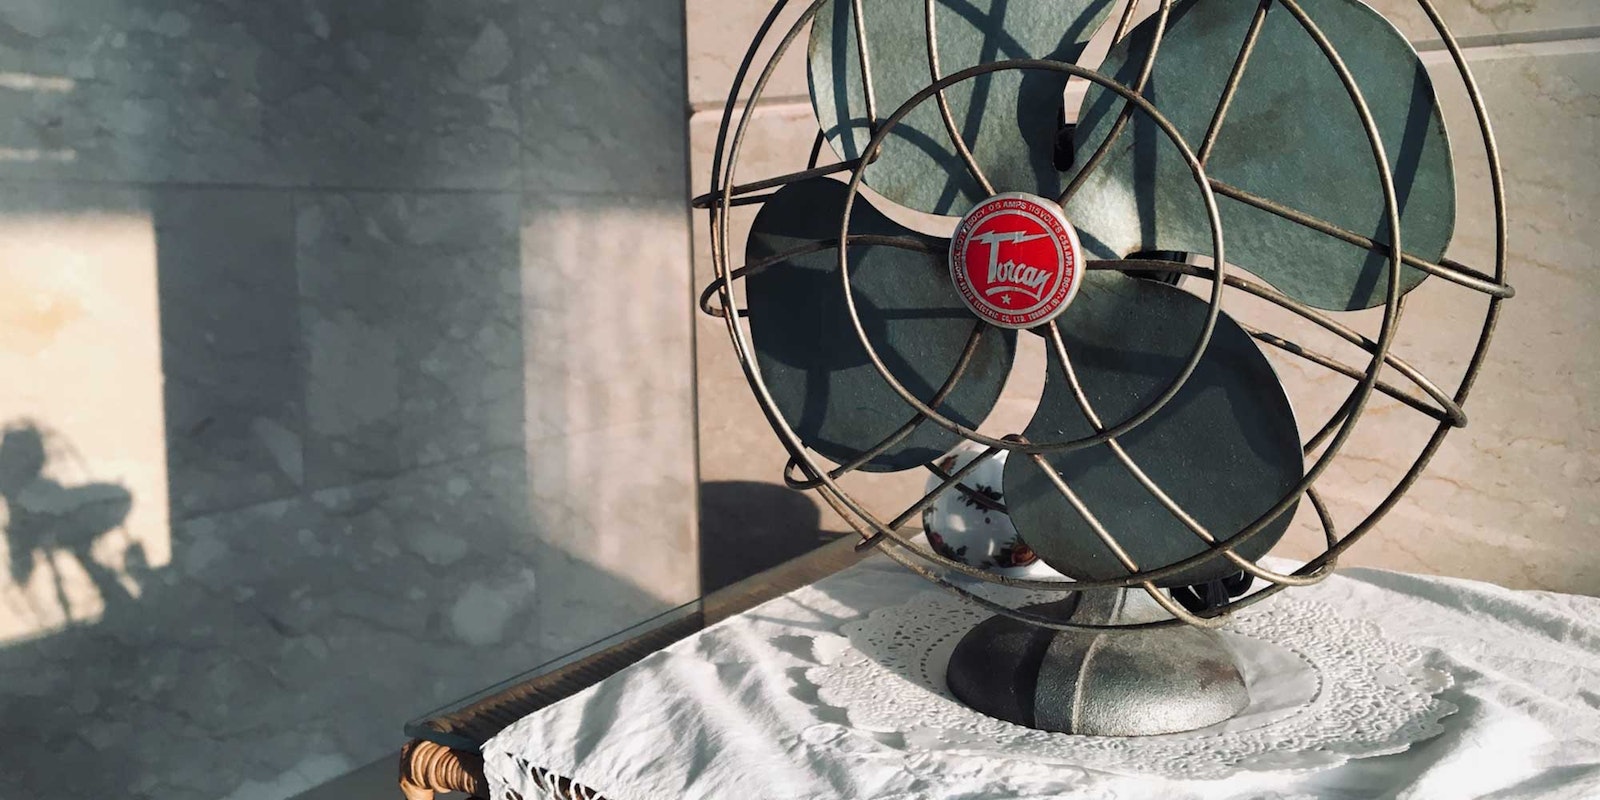 5 Tips to Keep Spinning Cool This Summer